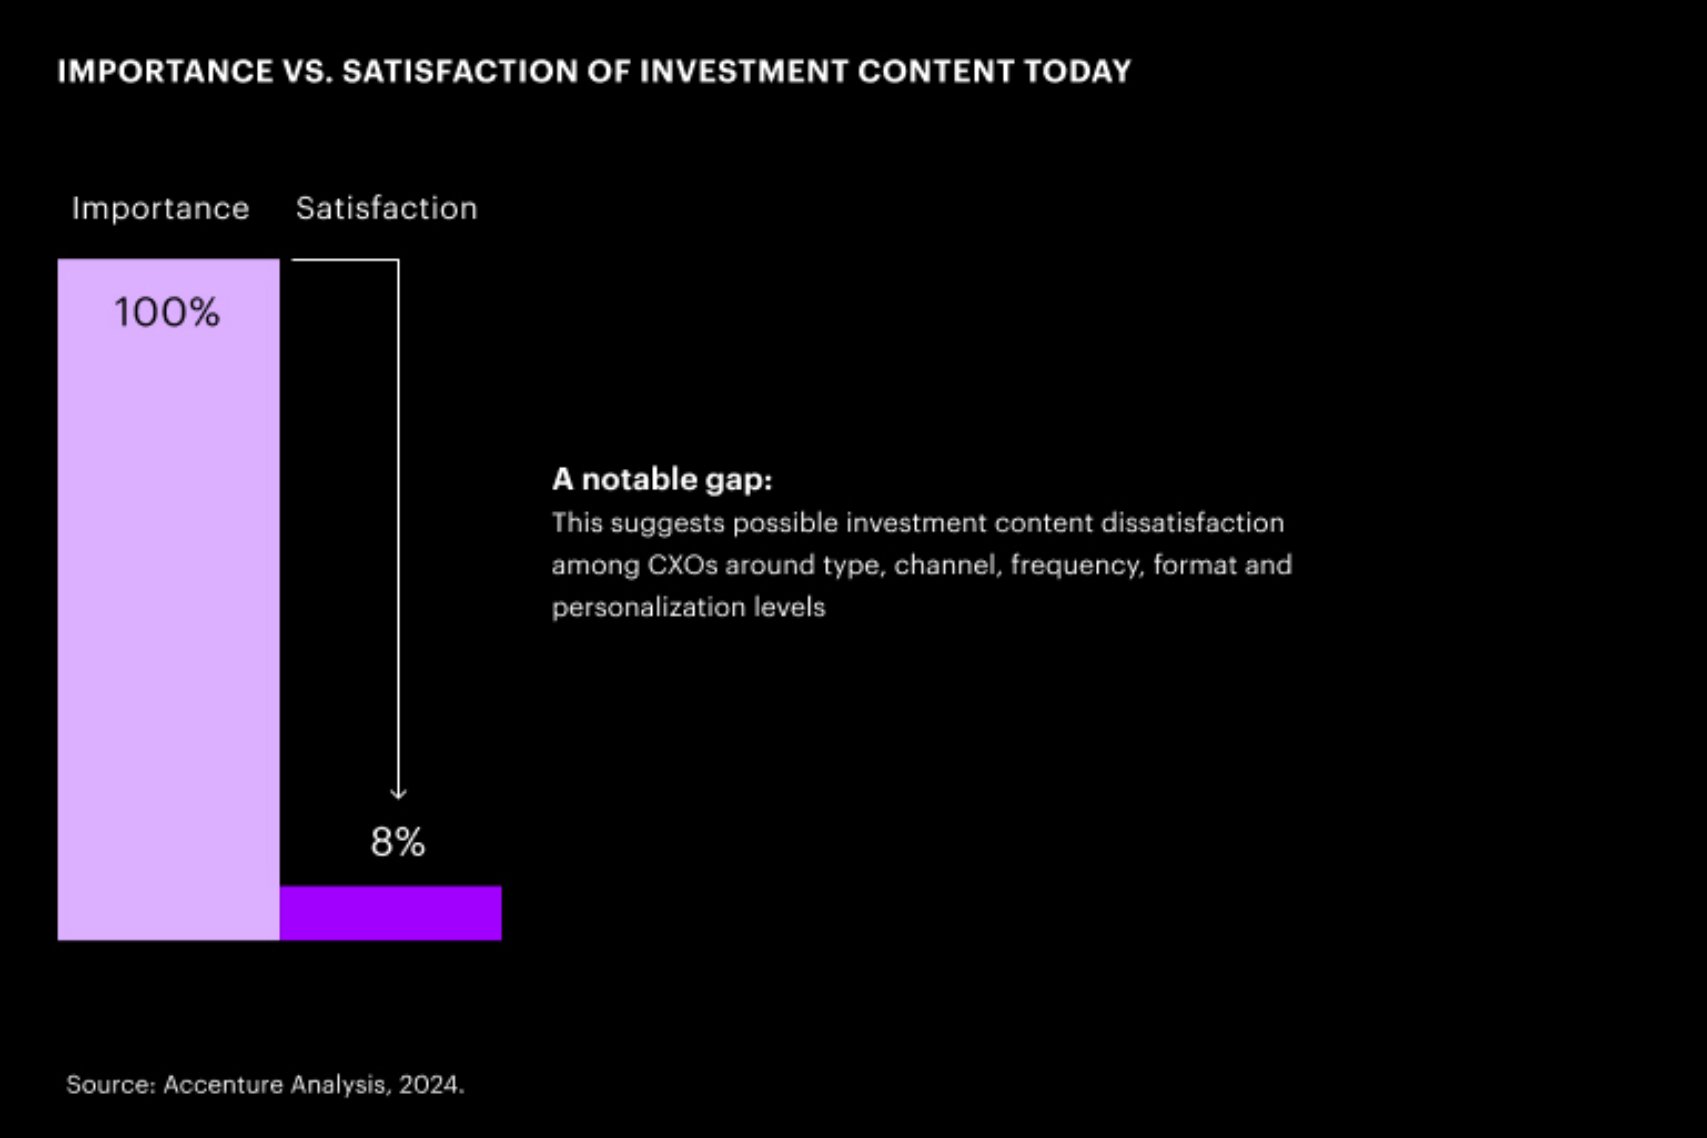 A bar graph compares the importance of investment content to satisfaction with it, with 100% importance and 8% satisfaction. The text below suggests possible dissatisfaction around type, channel, frequency, format and personalization levels.